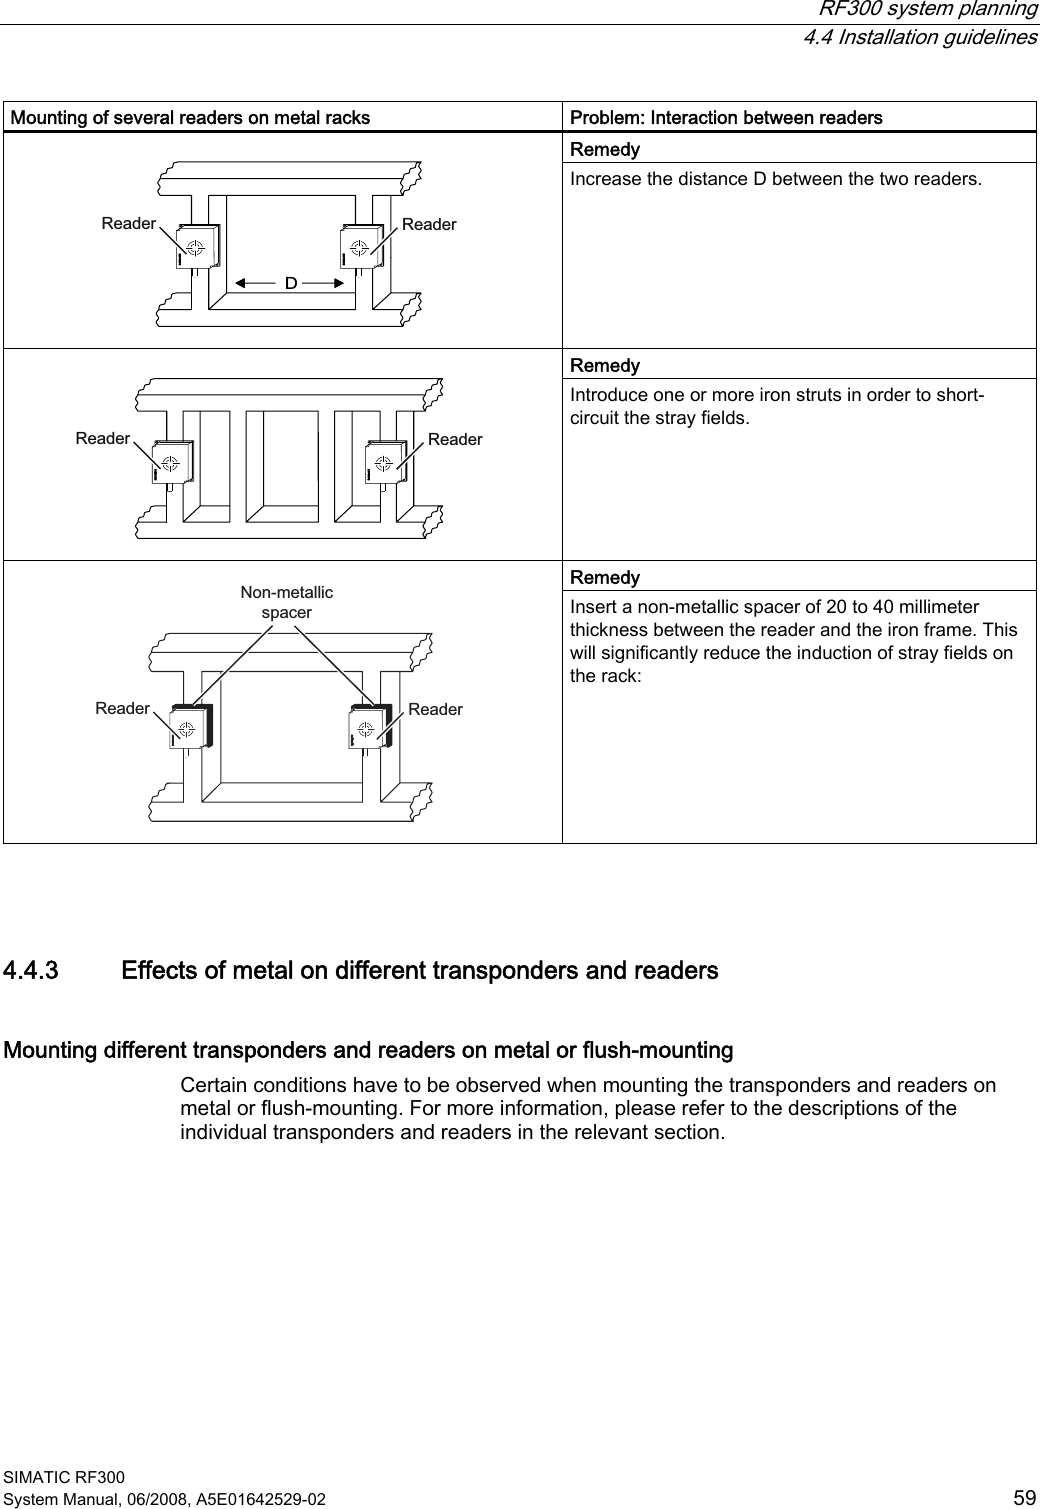  RF300 system planning  4.4 Installation guidelines SIMATIC RF300 System Manual, 06/2008, A5E01642529-02  59 Mounting of several readers on metal racks  Problem: Interaction between readers Remedy  &apos;5HDGHU 5HDGHU  Increase the distance D between the two readers. Remedy  5HDGHU 5HDGHU  Introduce one or more iron struts in order to short-circuit the stray fields. Remedy  1RQPHWDOOLFVSDFHU5HDGHU 5HDGHU  Insert a non-metallic spacer of 20 to 40 millimeter thickness between the reader and the iron frame. This will significantly reduce the induction of stray fields on the rack:   4.4.3 Effects of metal on different transponders and readers Mounting different transponders and readers on metal or flush-mounting Certain conditions have to be observed when mounting the transponders and readers on metal or flush-mounting. For more information, please refer to the descriptions of the individual transponders and readers in the relevant section. 